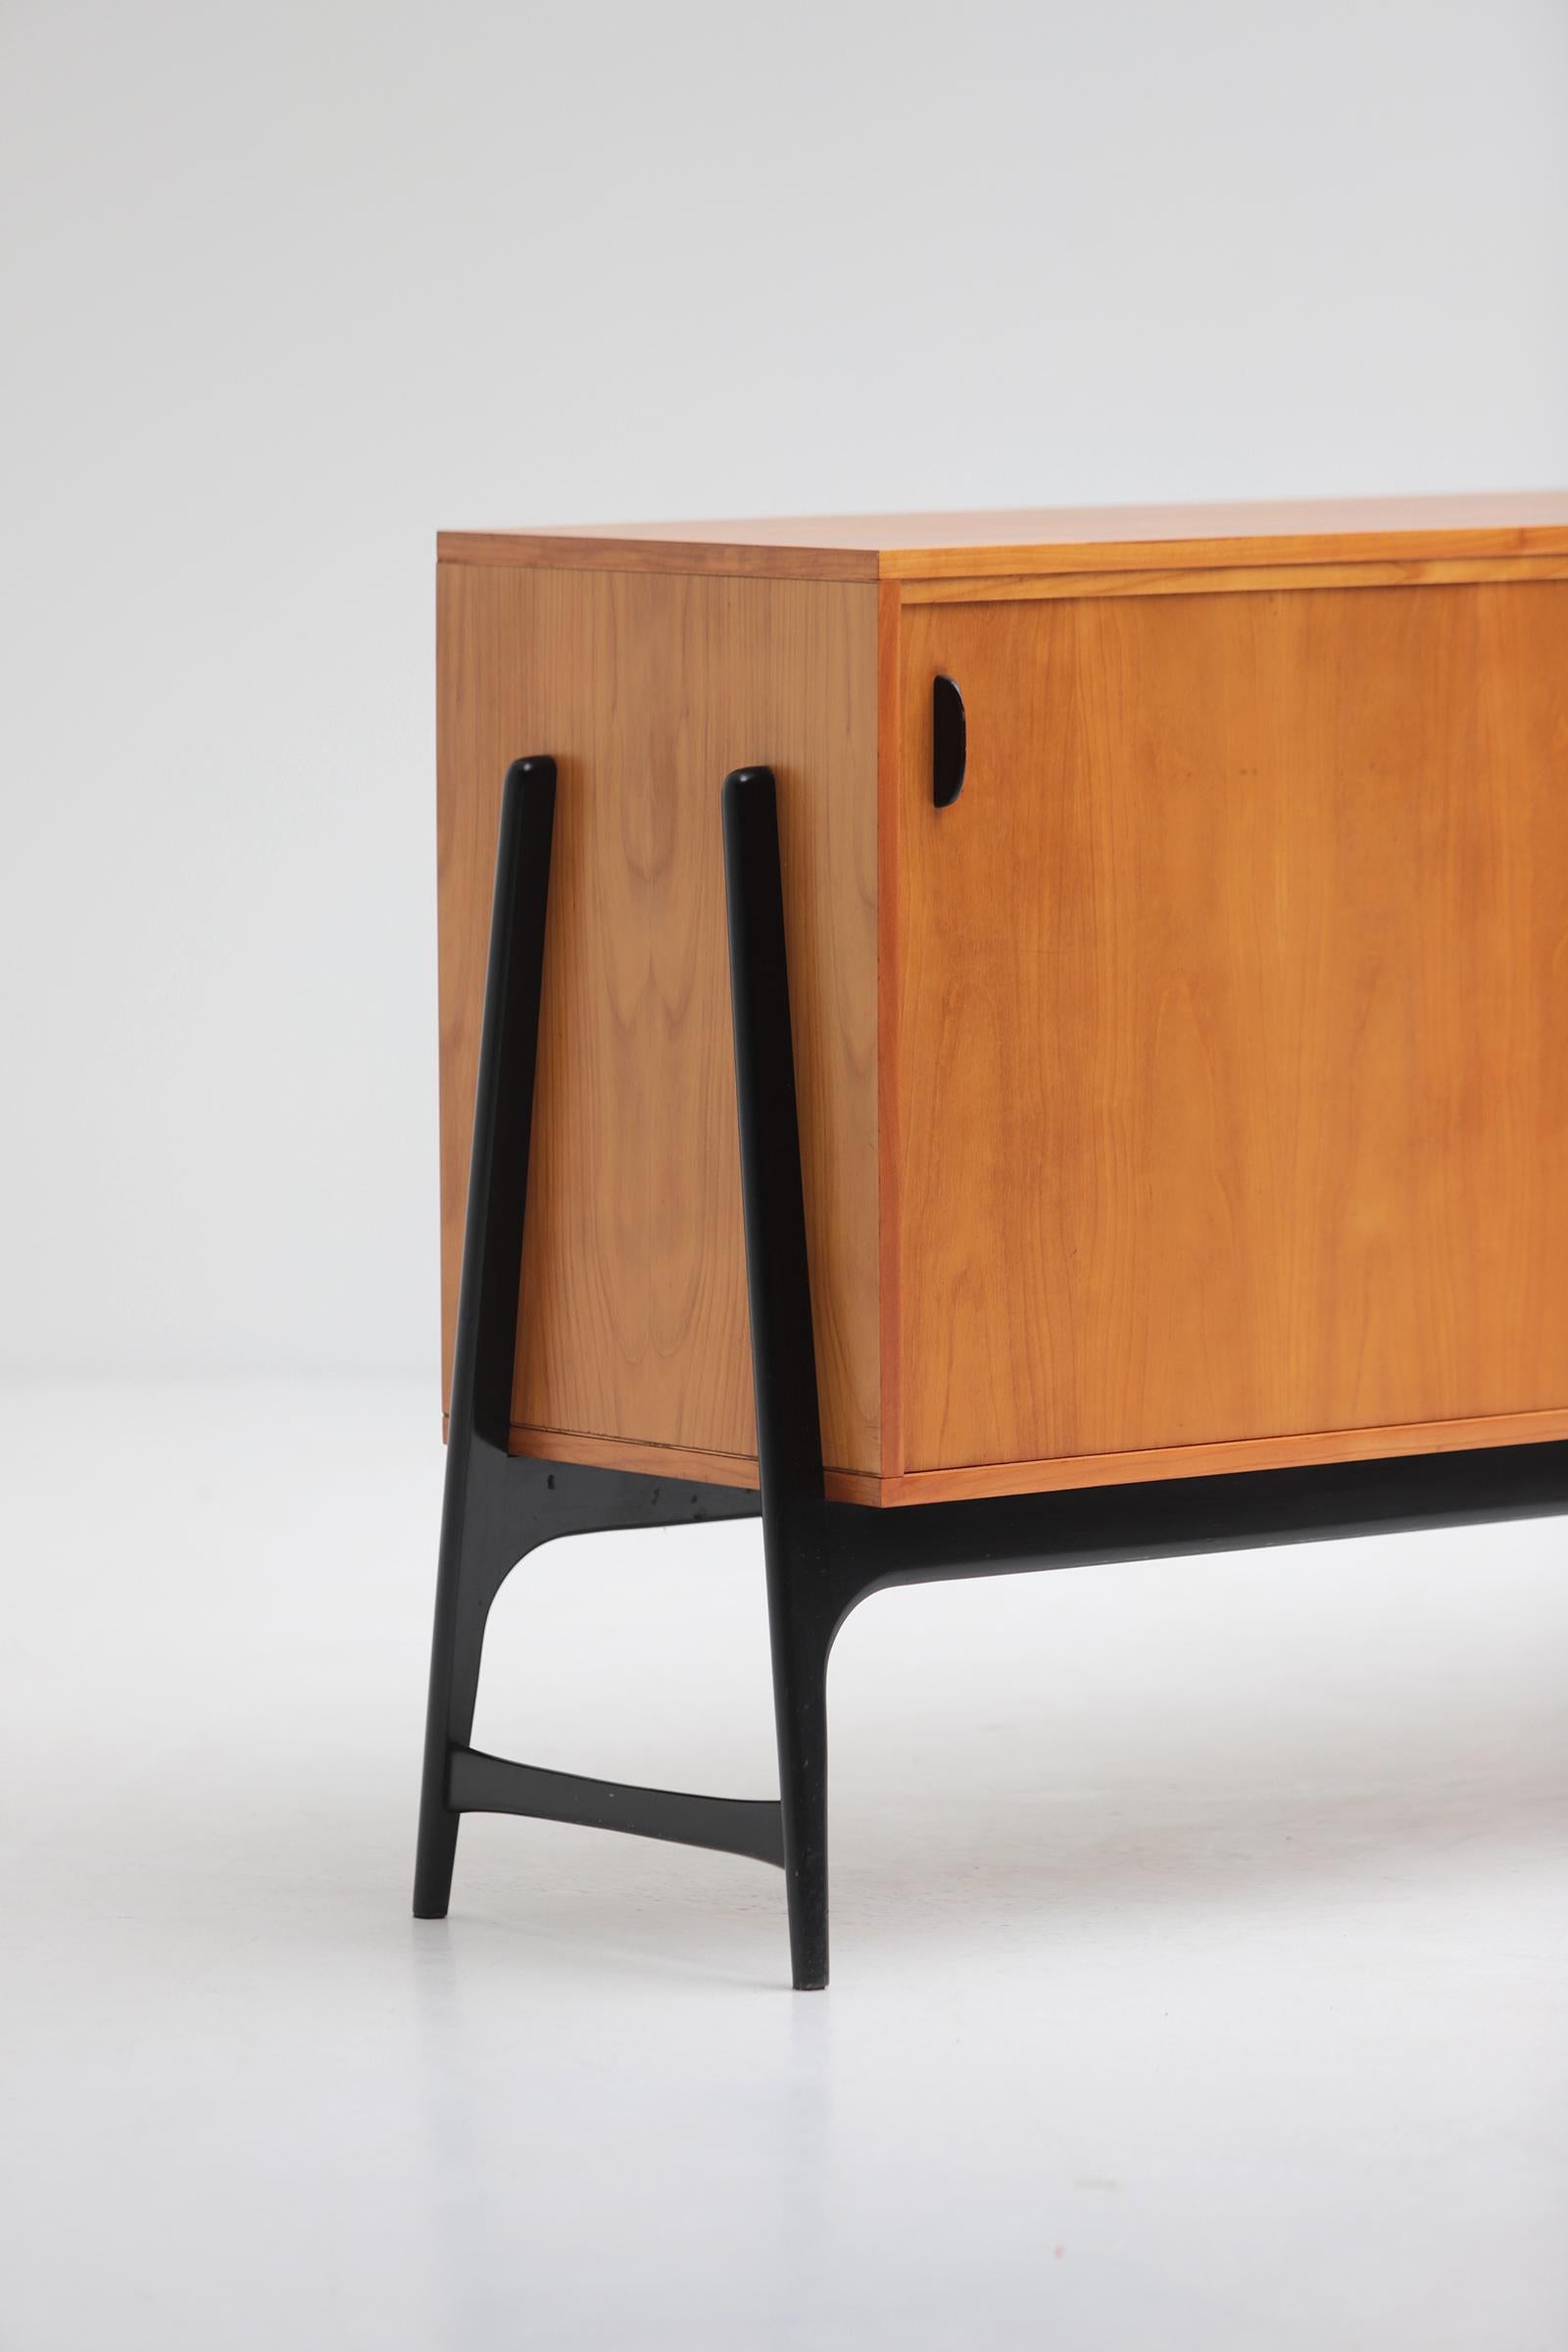 Unique midcentury sideboard by Alfred Hendrickx designed in 1958 for Belform For Sale 4